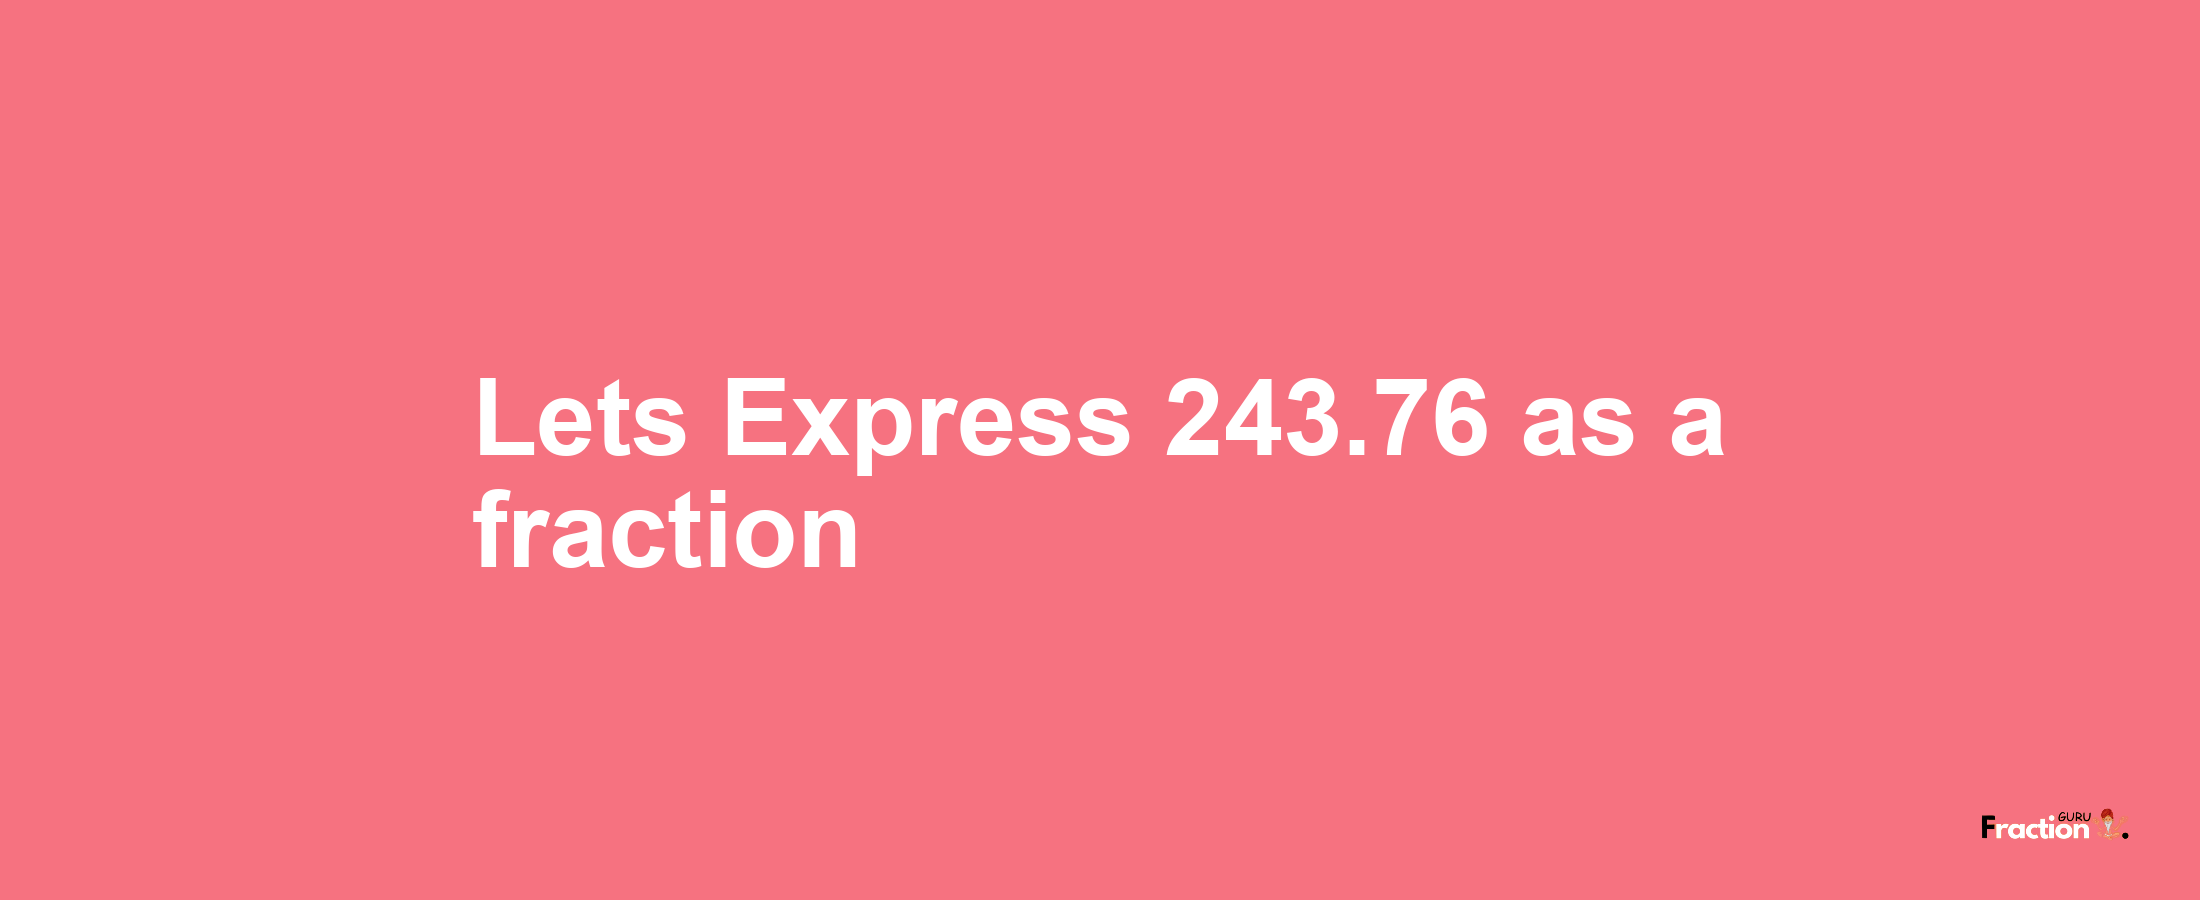 Lets Express 243.76 as afraction